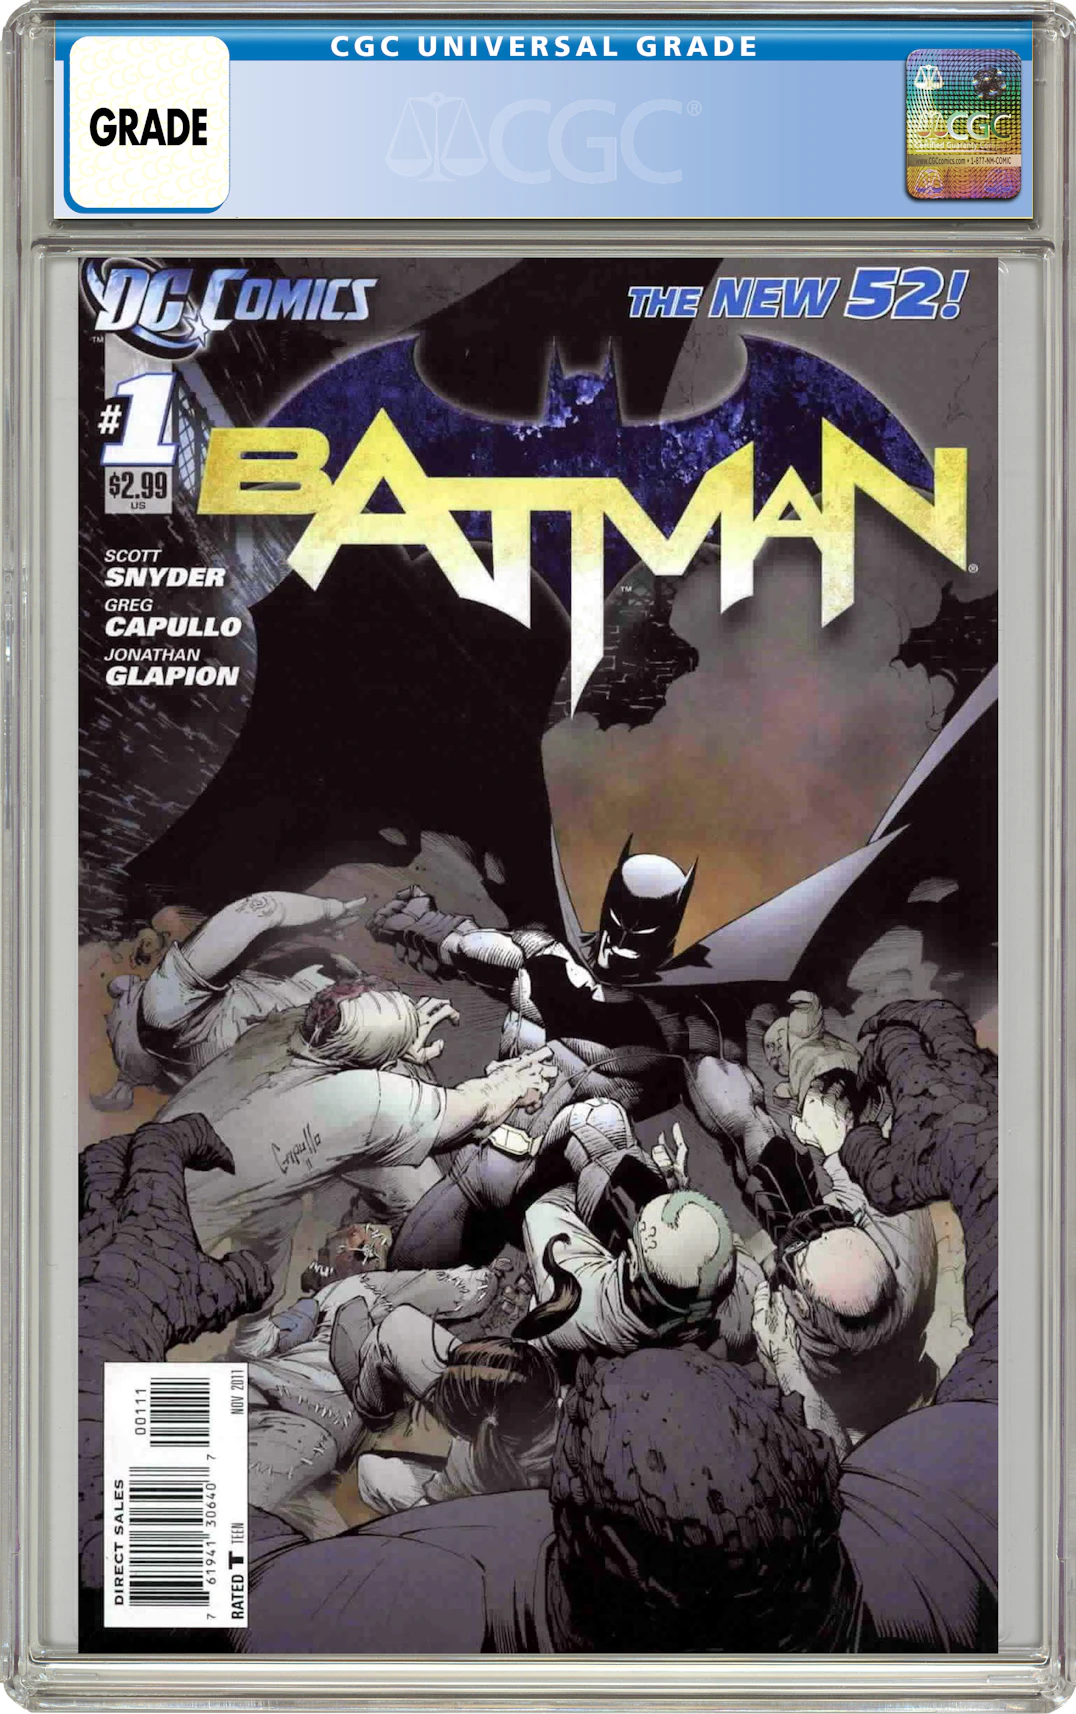 Comic Books Batman - Buy & Sell Collectibles.